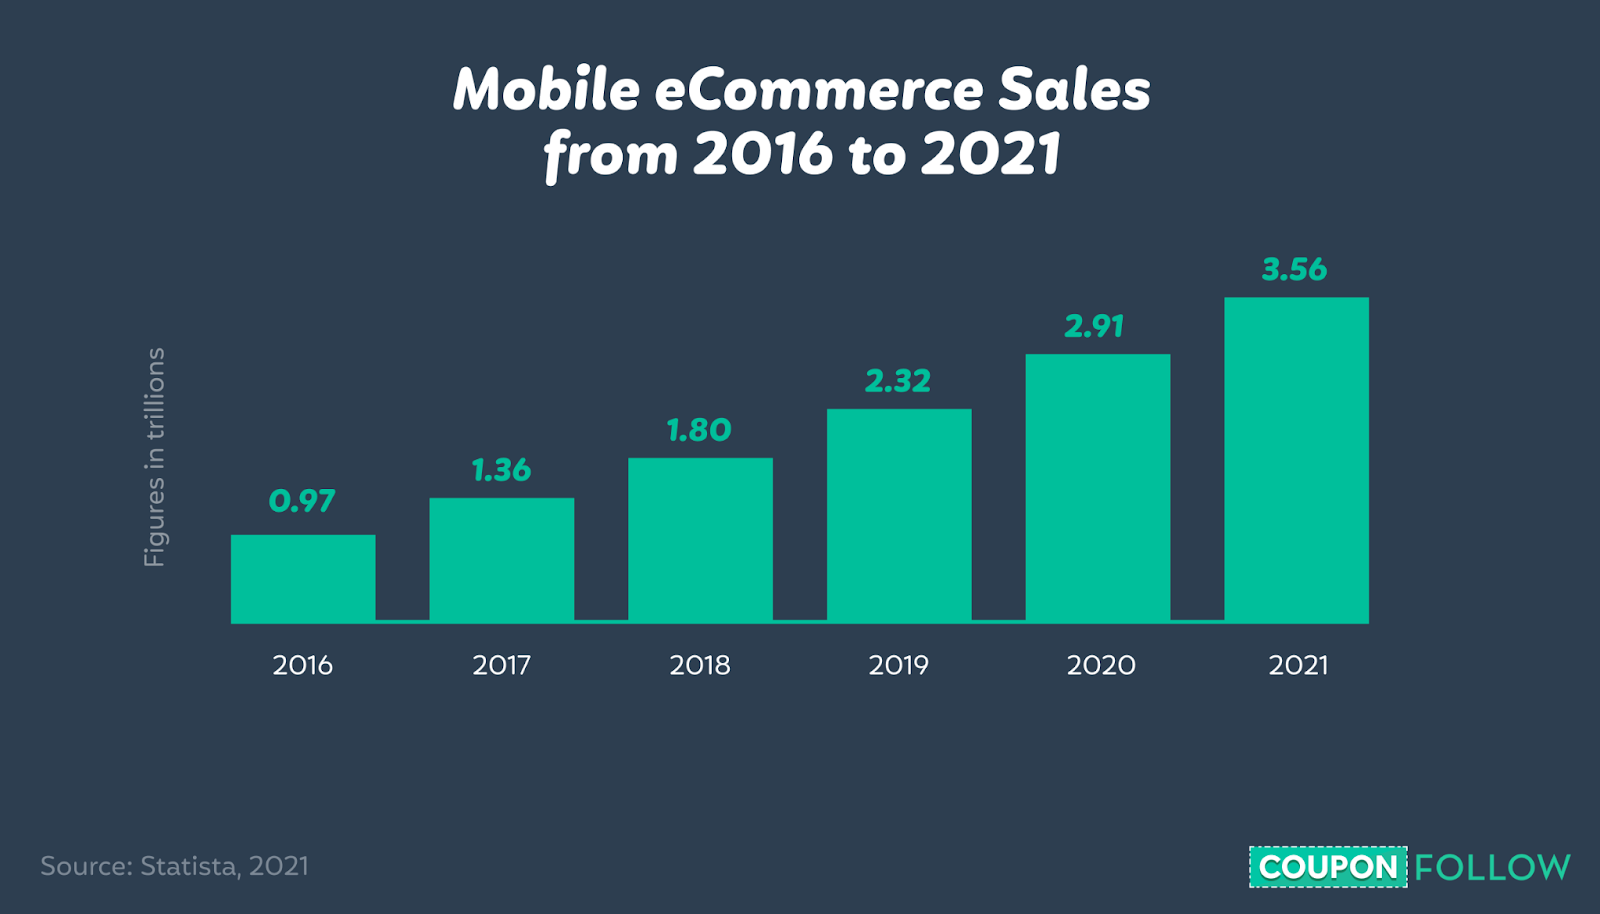 Graph depicting m-Commerce sales from 2016 to 2021